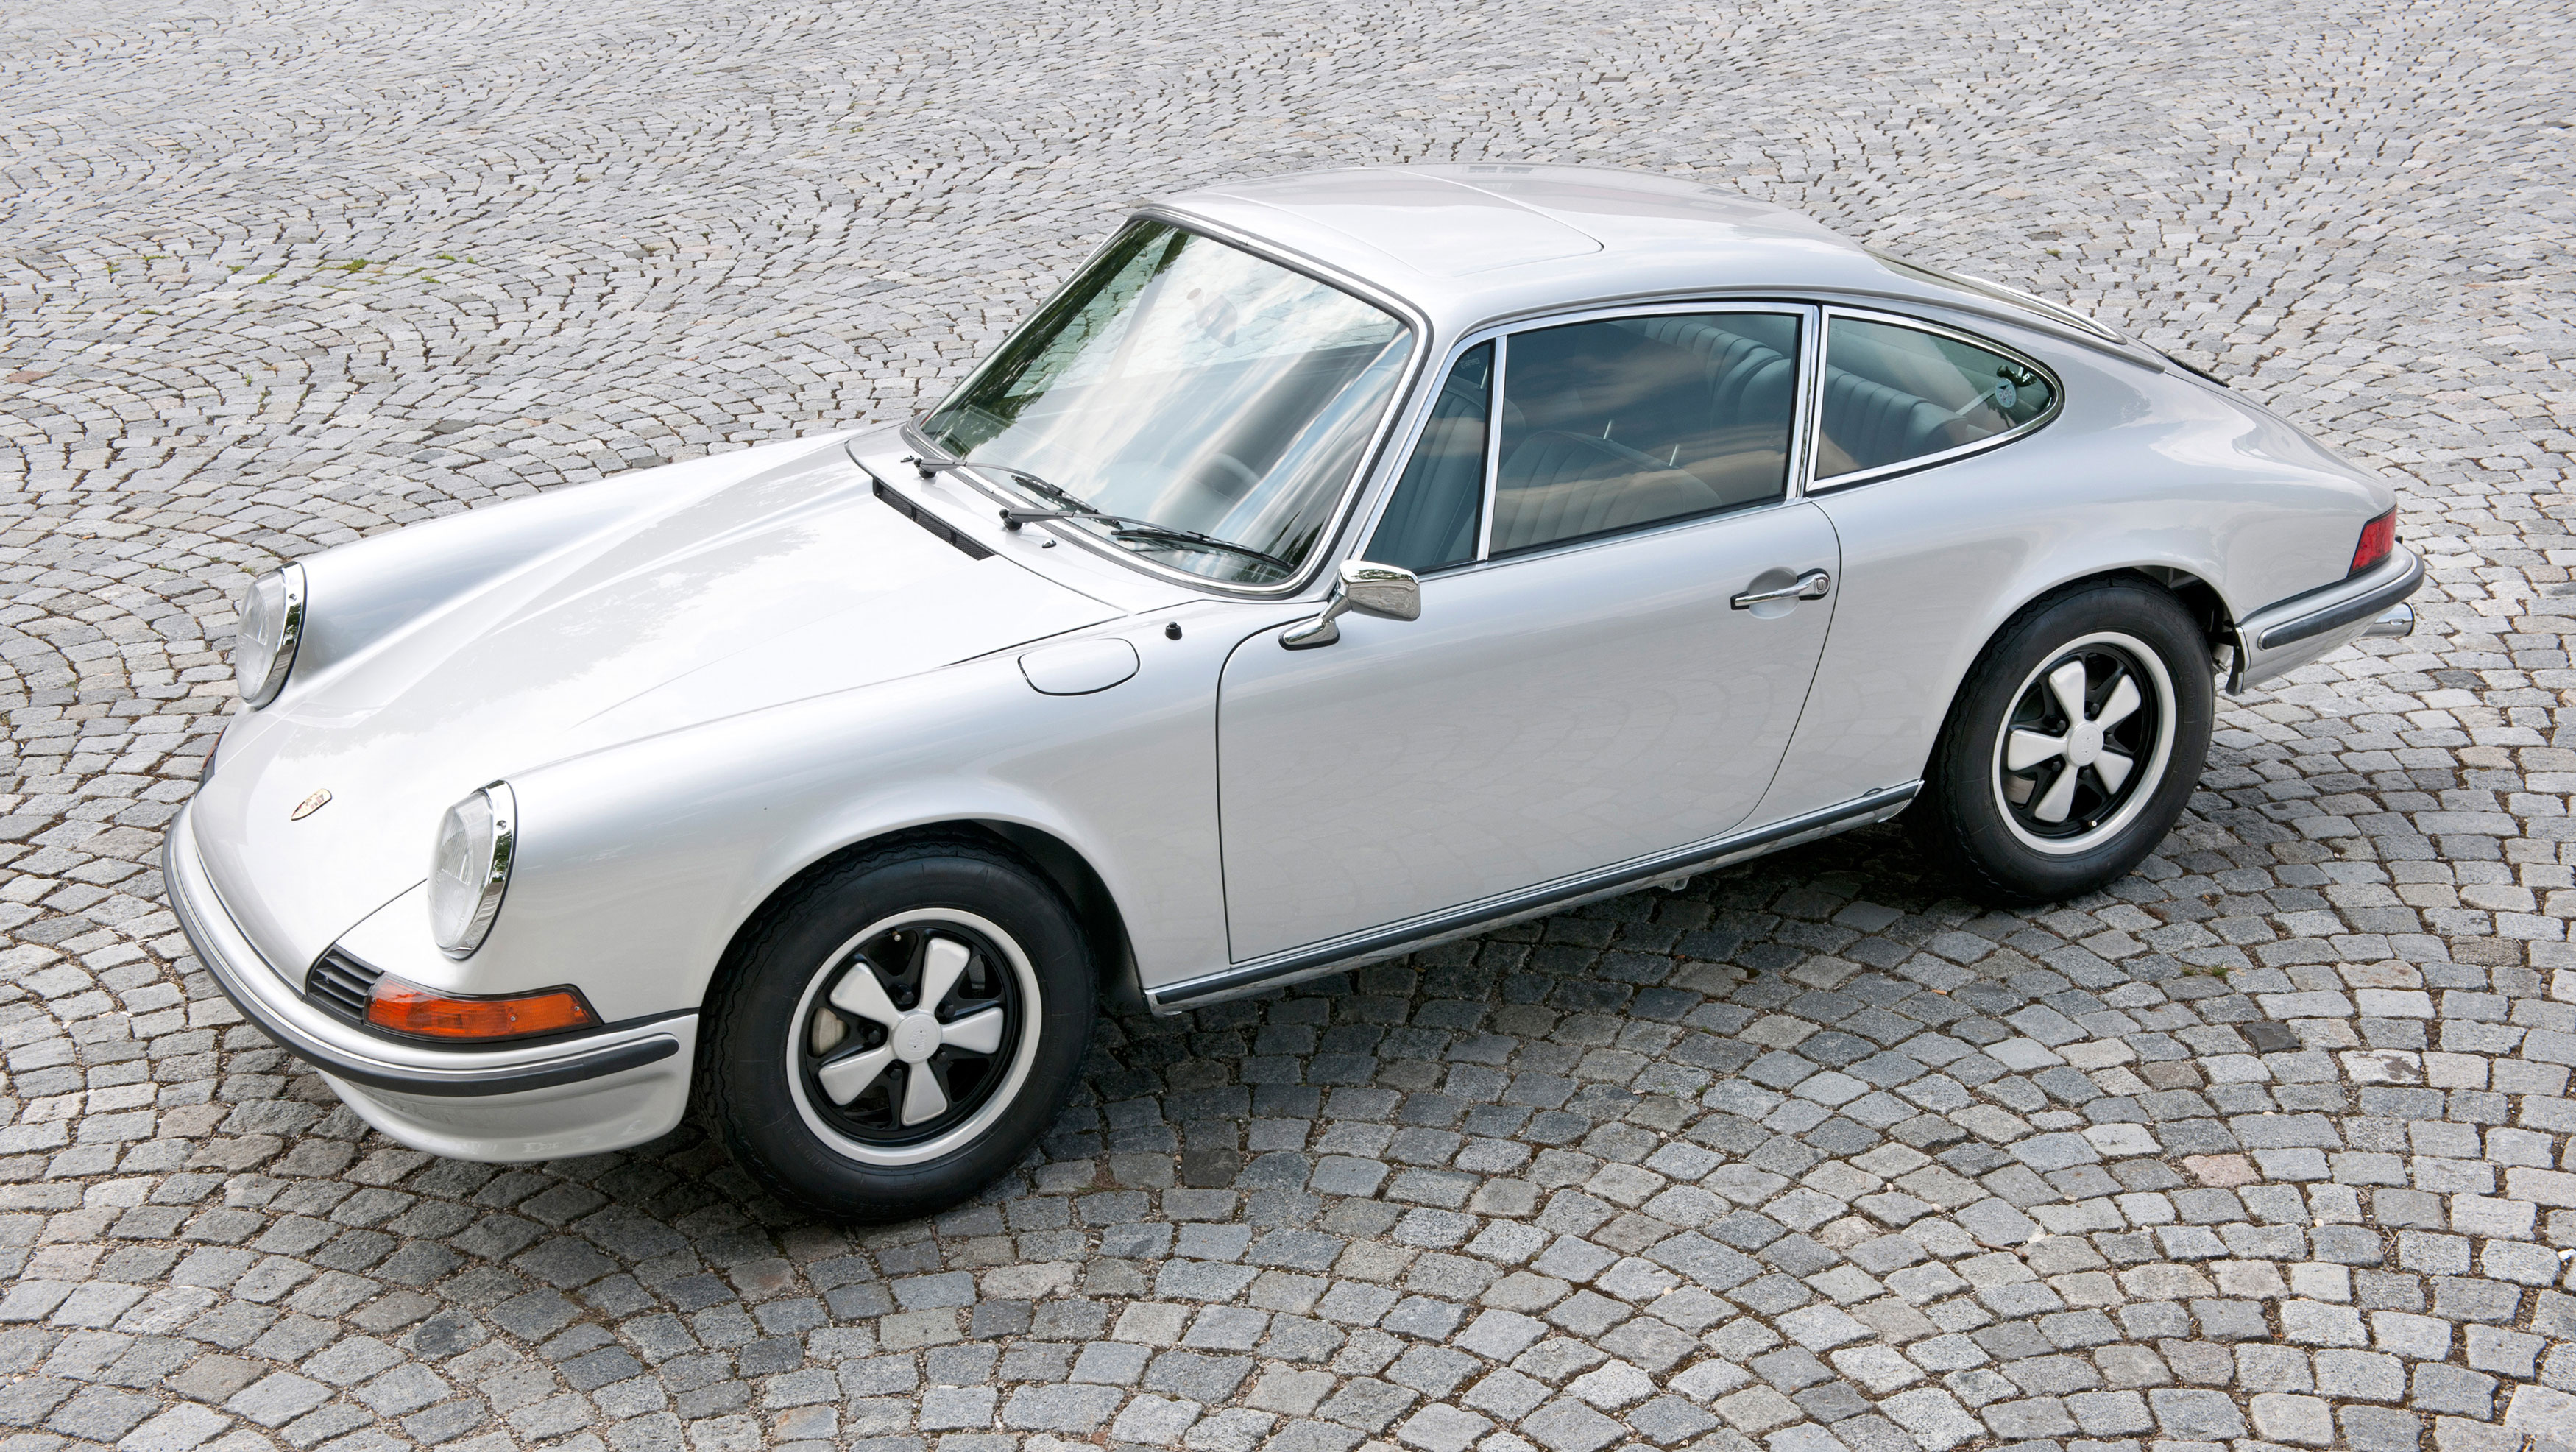 Silver 911 F Model with Fuchs wheels parked on cobbles